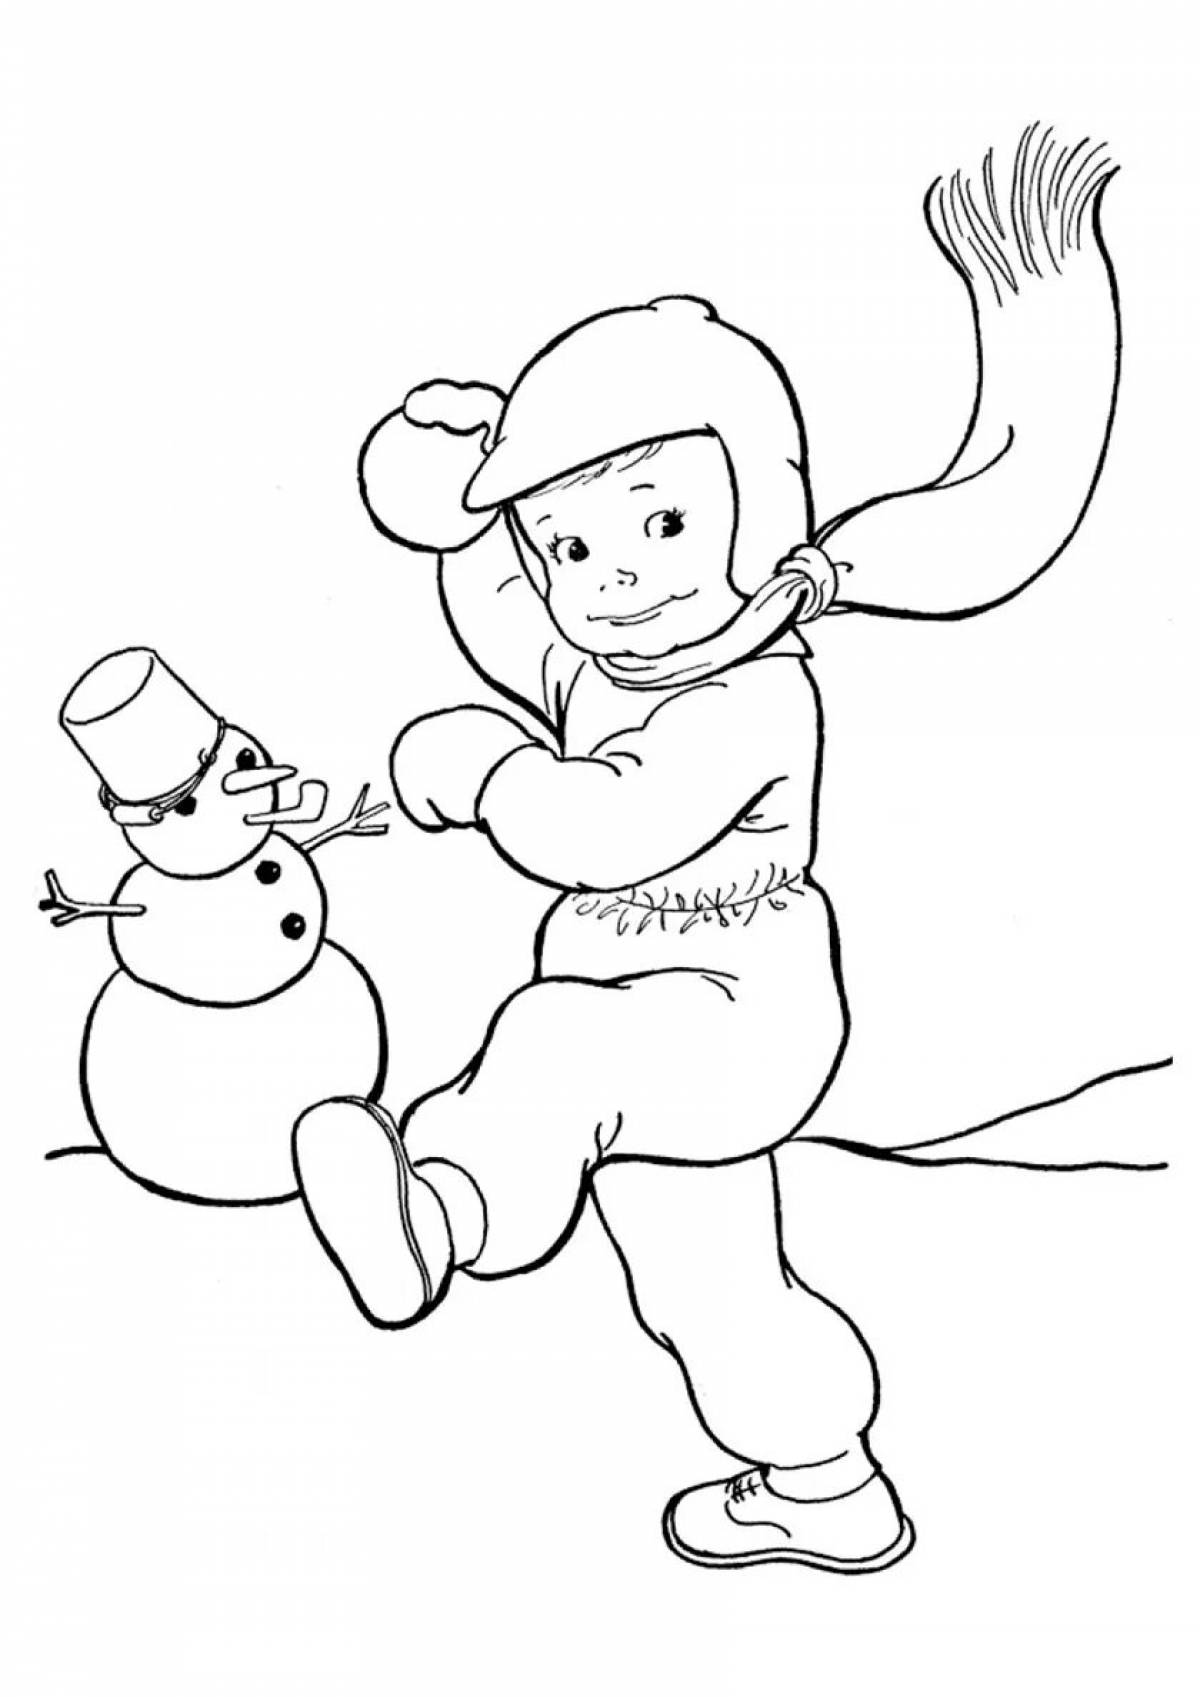 A fun winter coloring game for kids